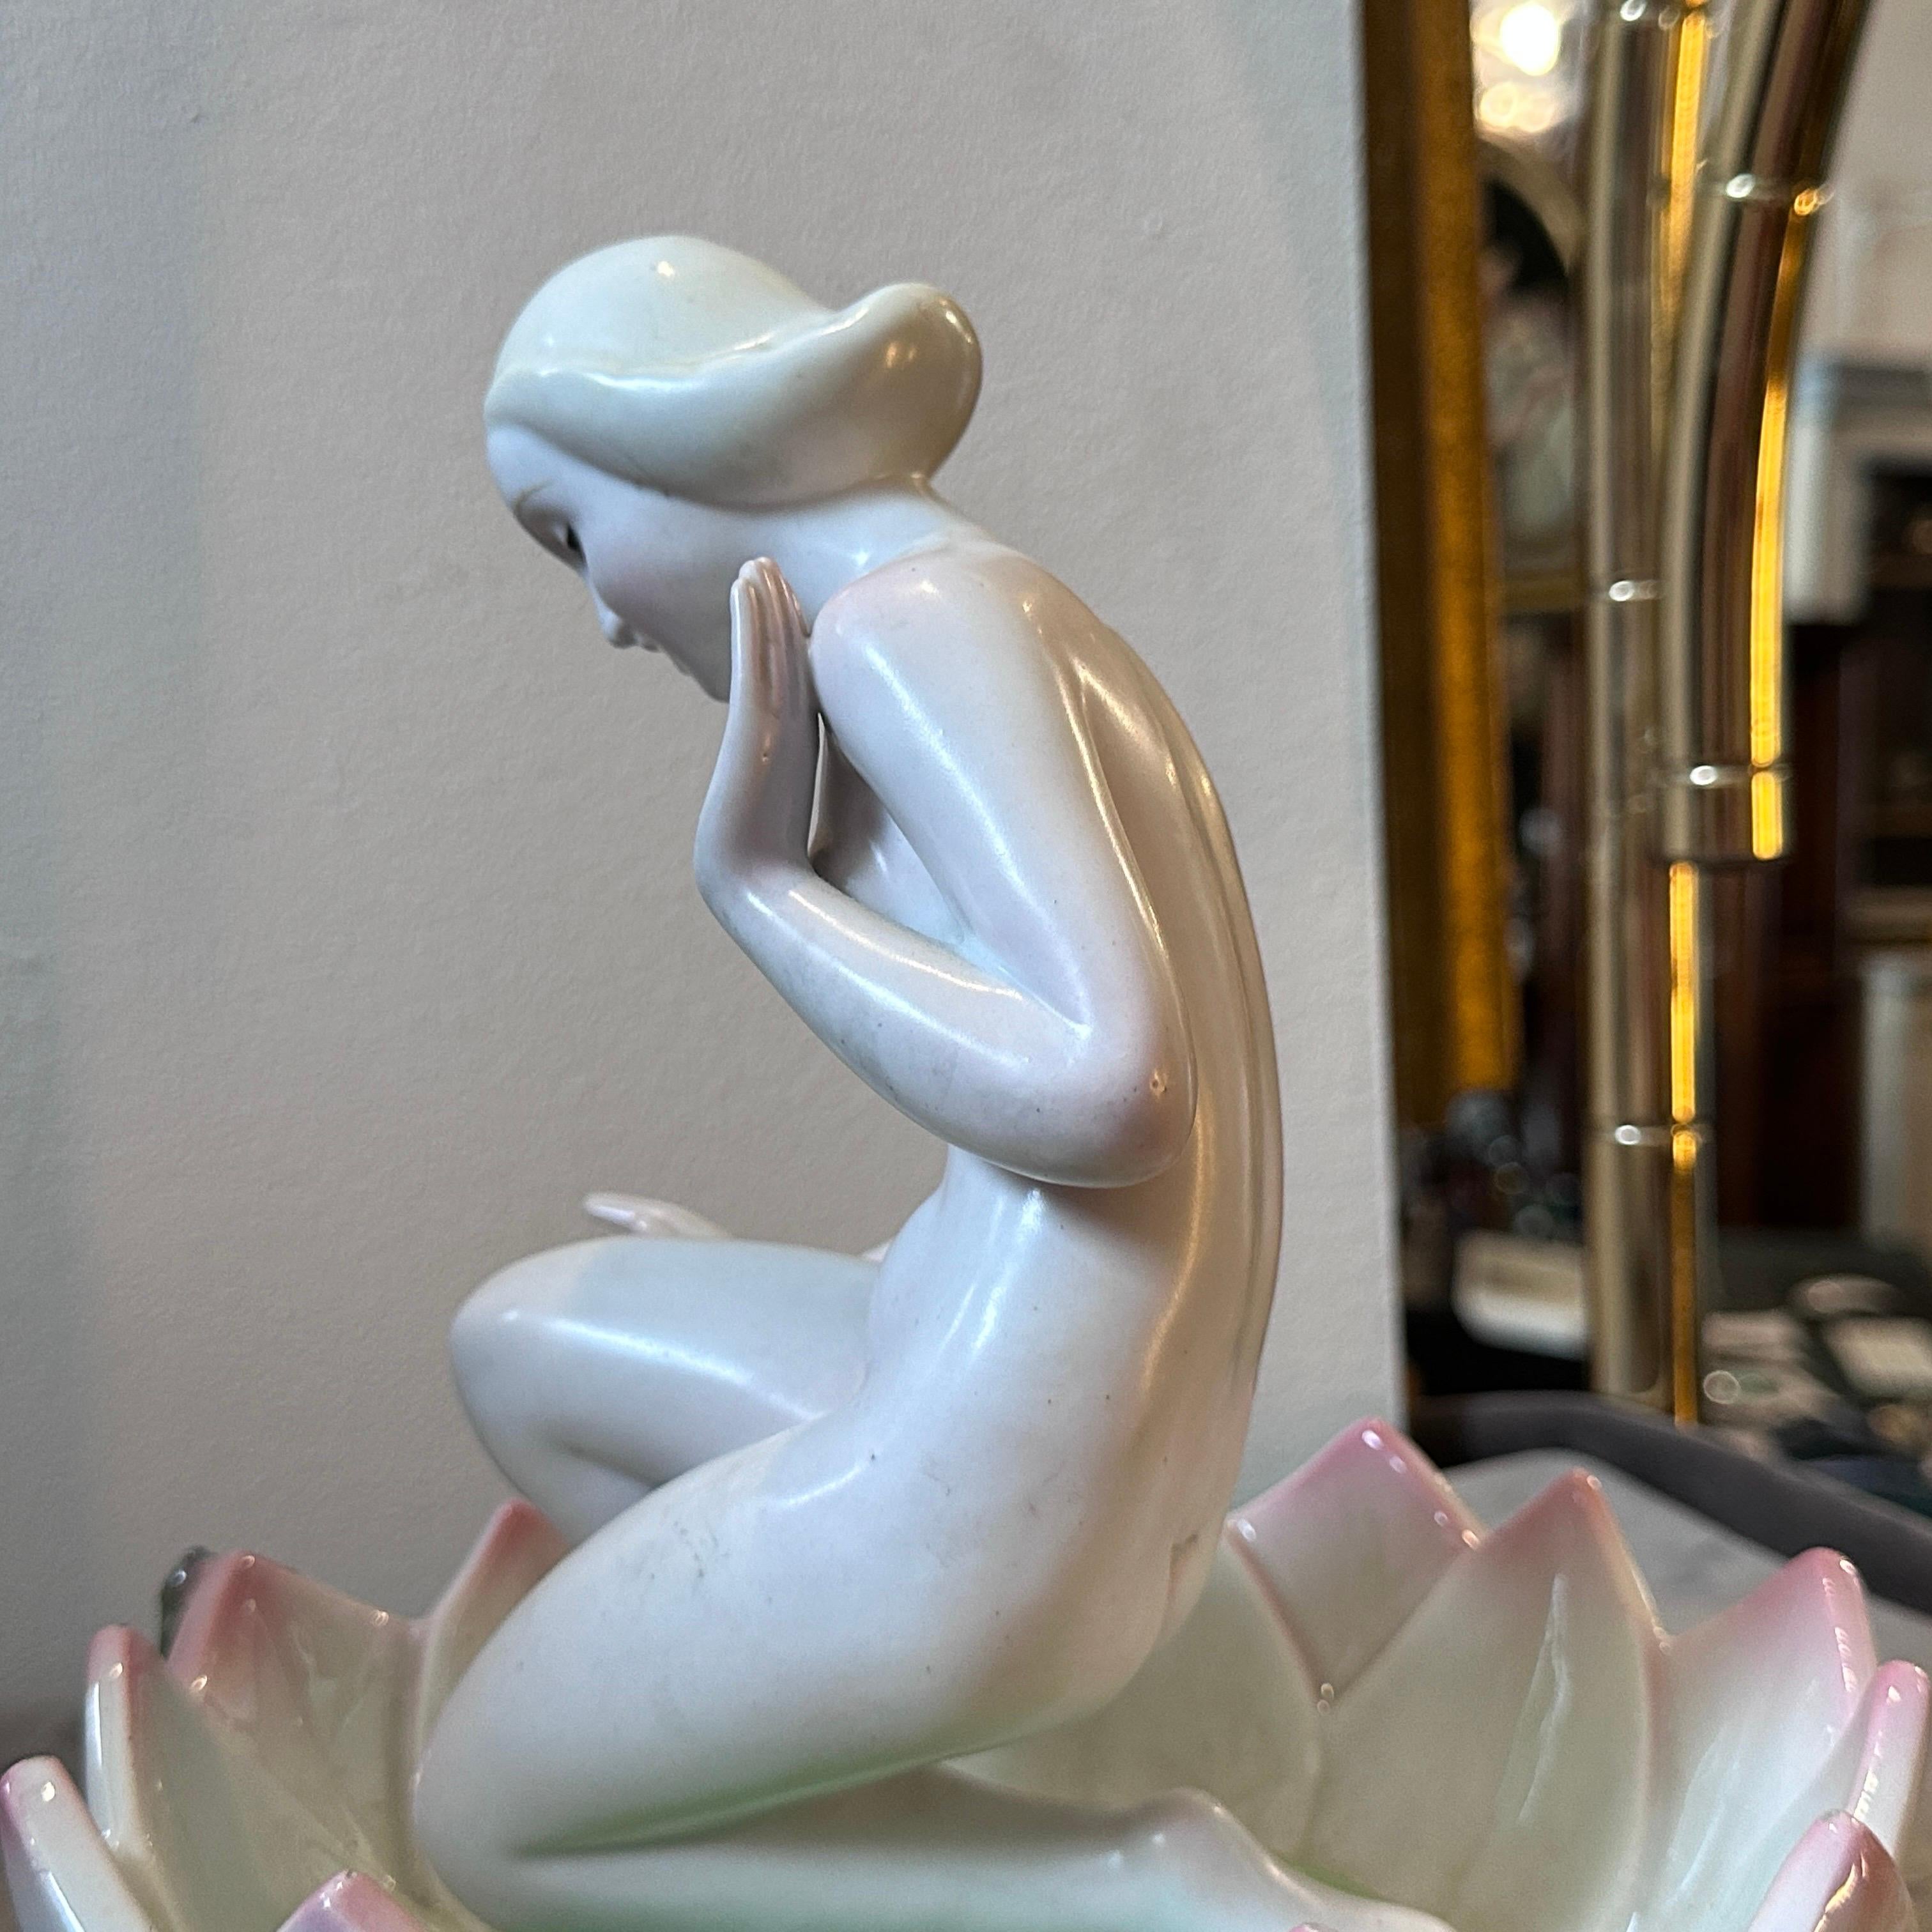 1940s Art Deco Porcelain Figure of a Woman on a Flower by Giovanni Ronzan For Sale 2